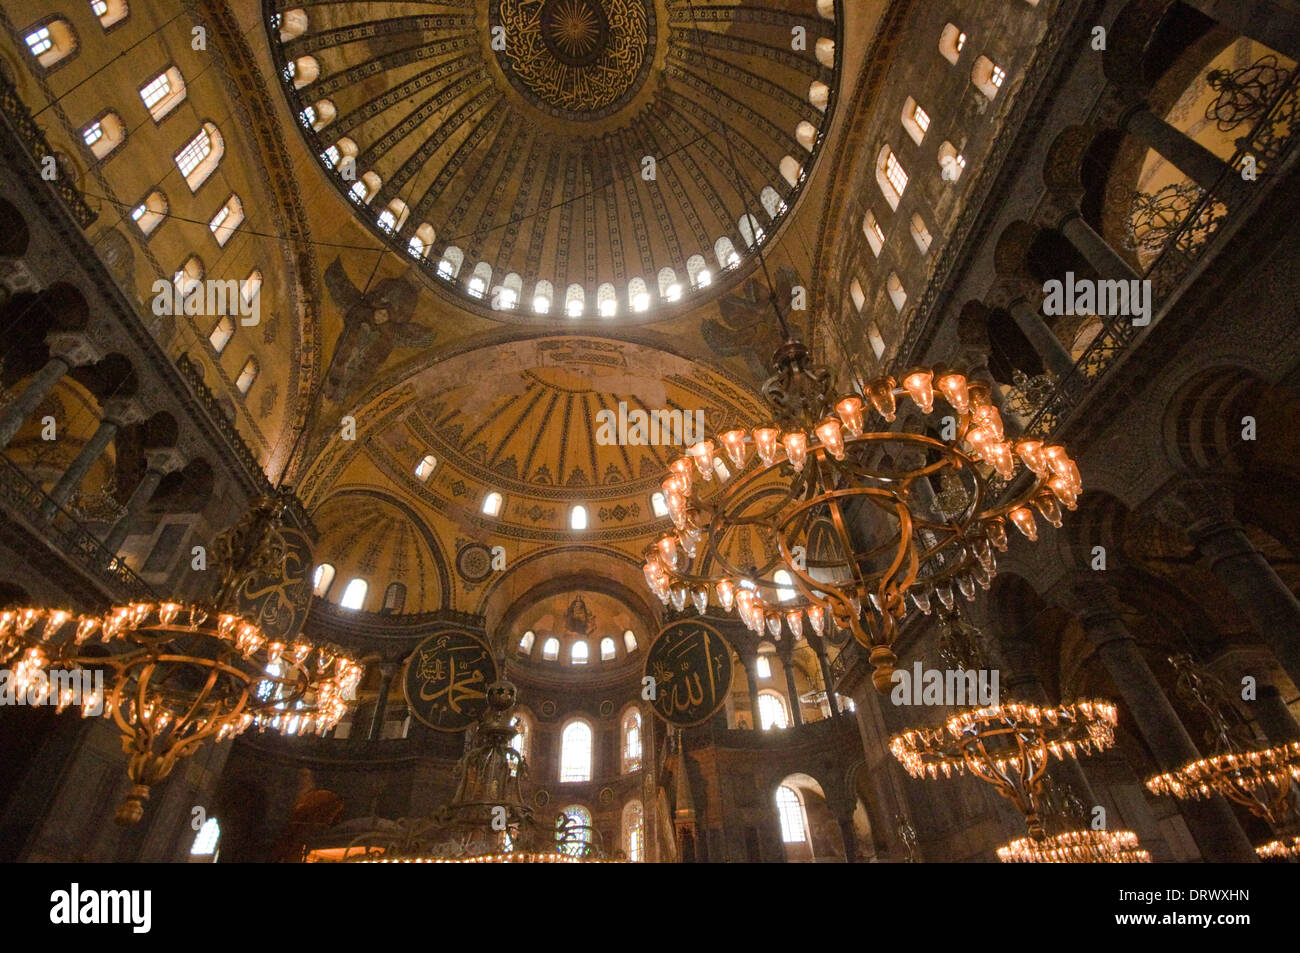 EUROPE/ASIA, Turkey, Istanbul, Aya Sofya Museum (537 AD, formerly mosque and church), interior featuring ceiling decoration Stock Photo